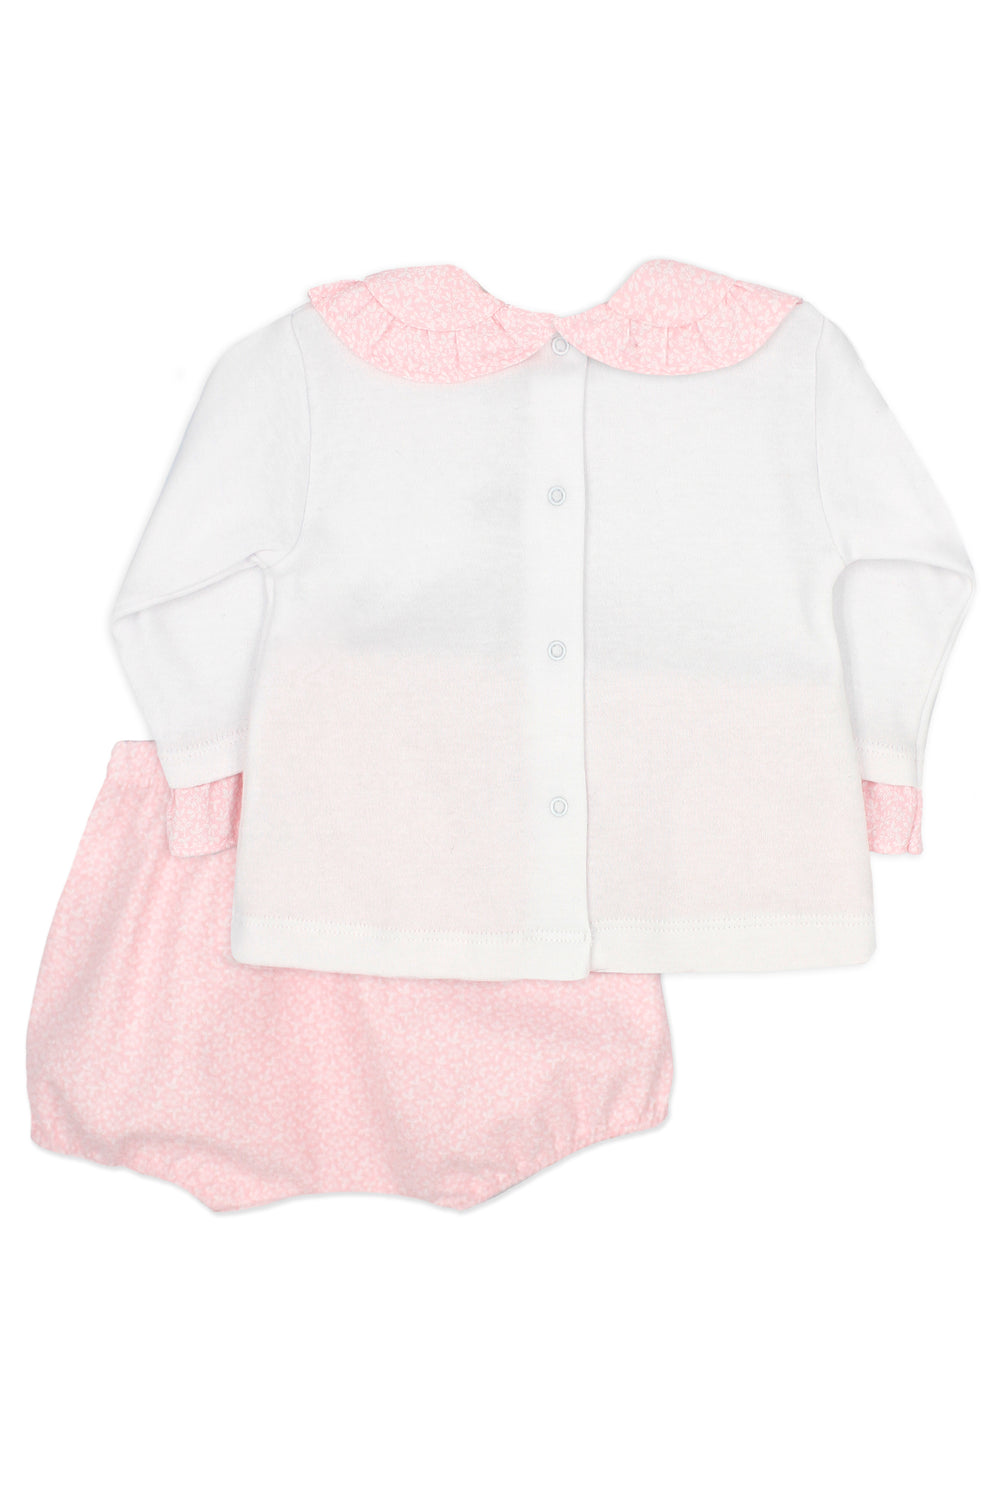 Rapife "Kaylee" Pink Floral Blouse & Bloomers | Millie and John